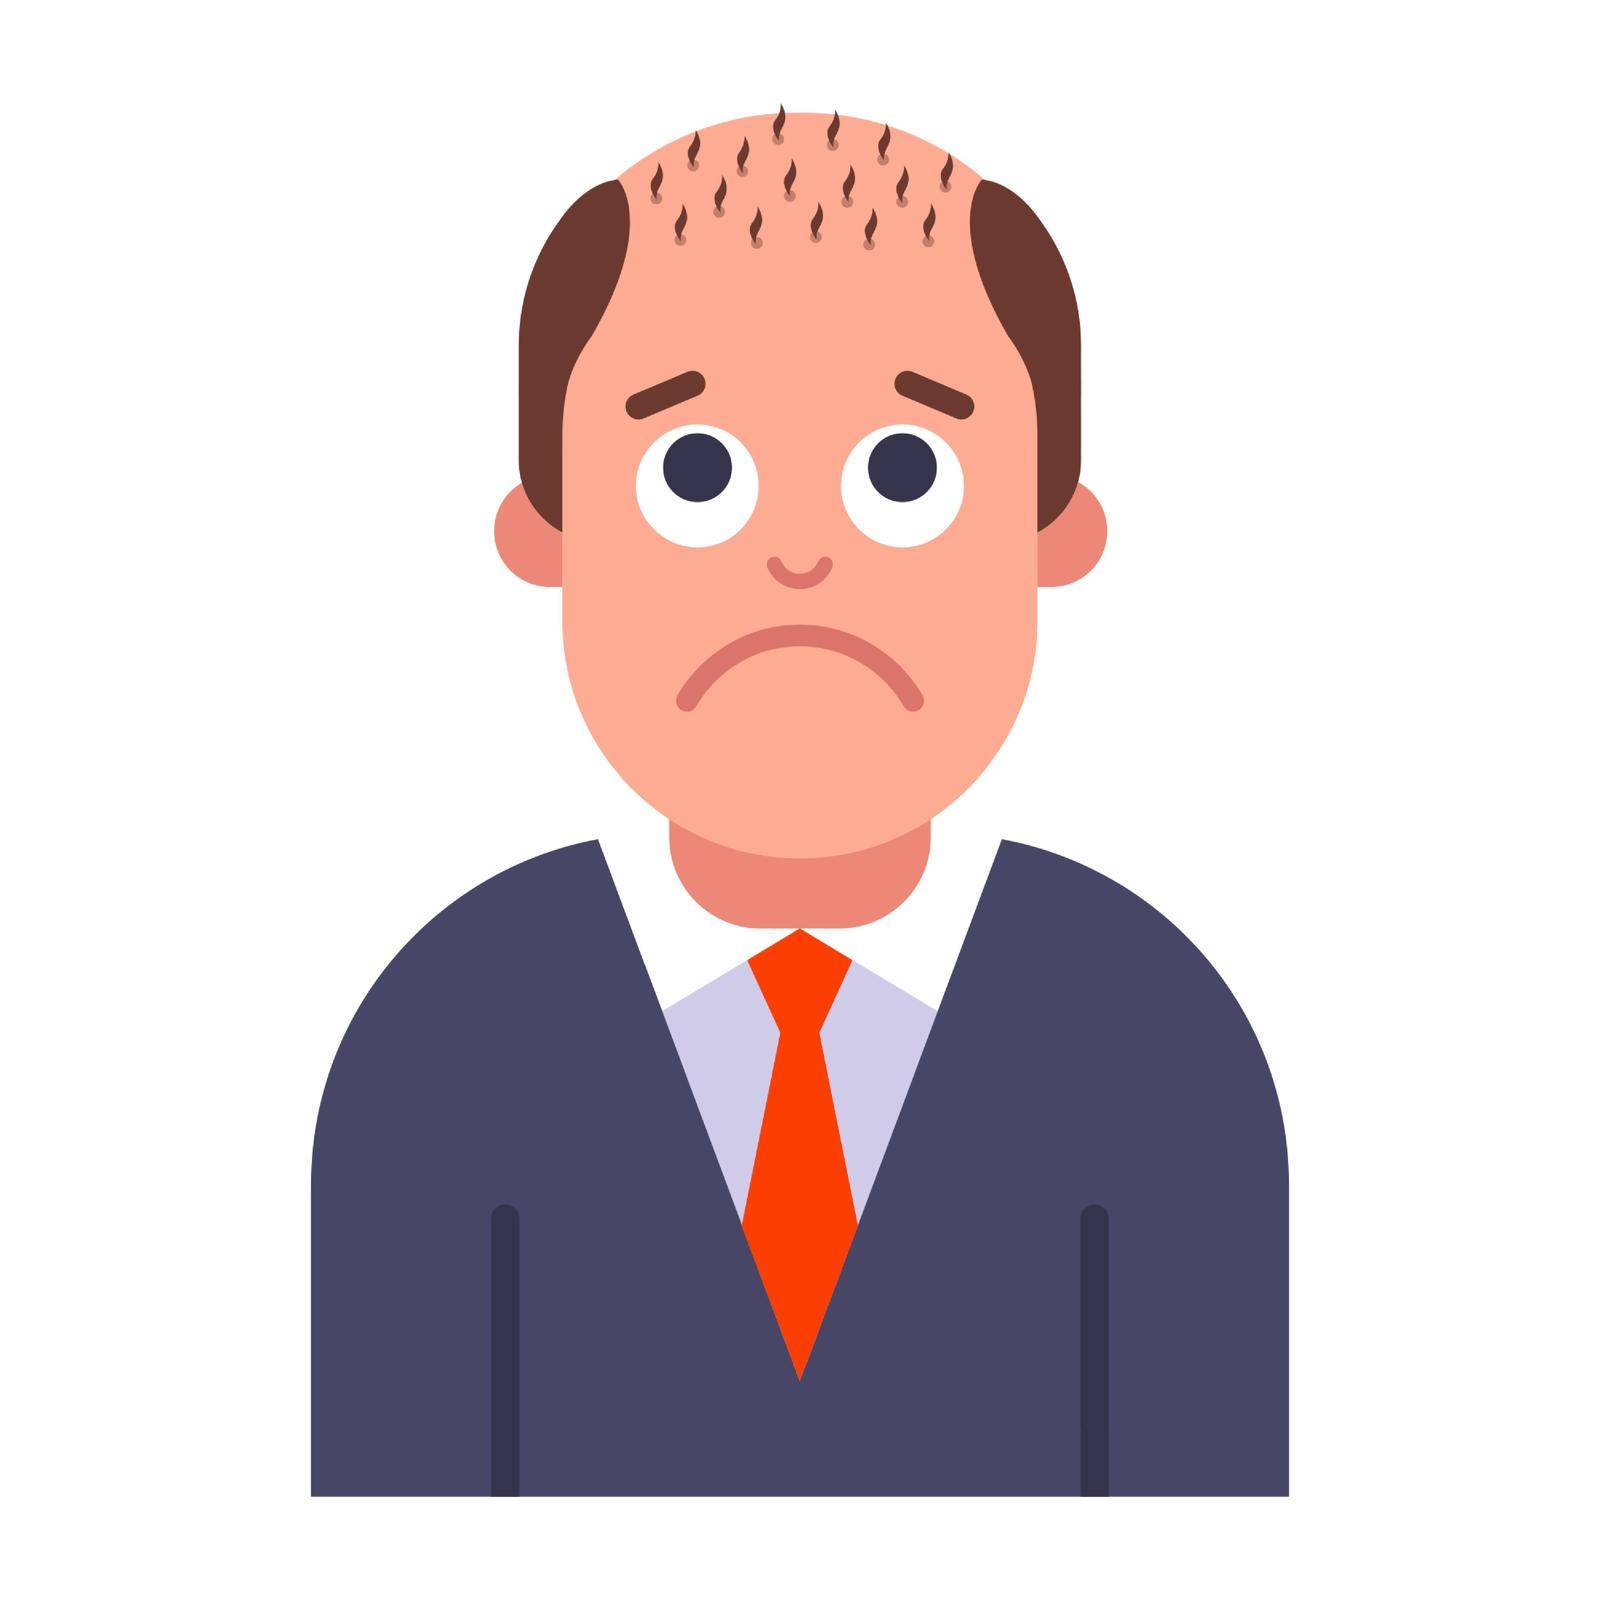 a problem with male pattern baldness. hair loss on the head. flat vector illustration.